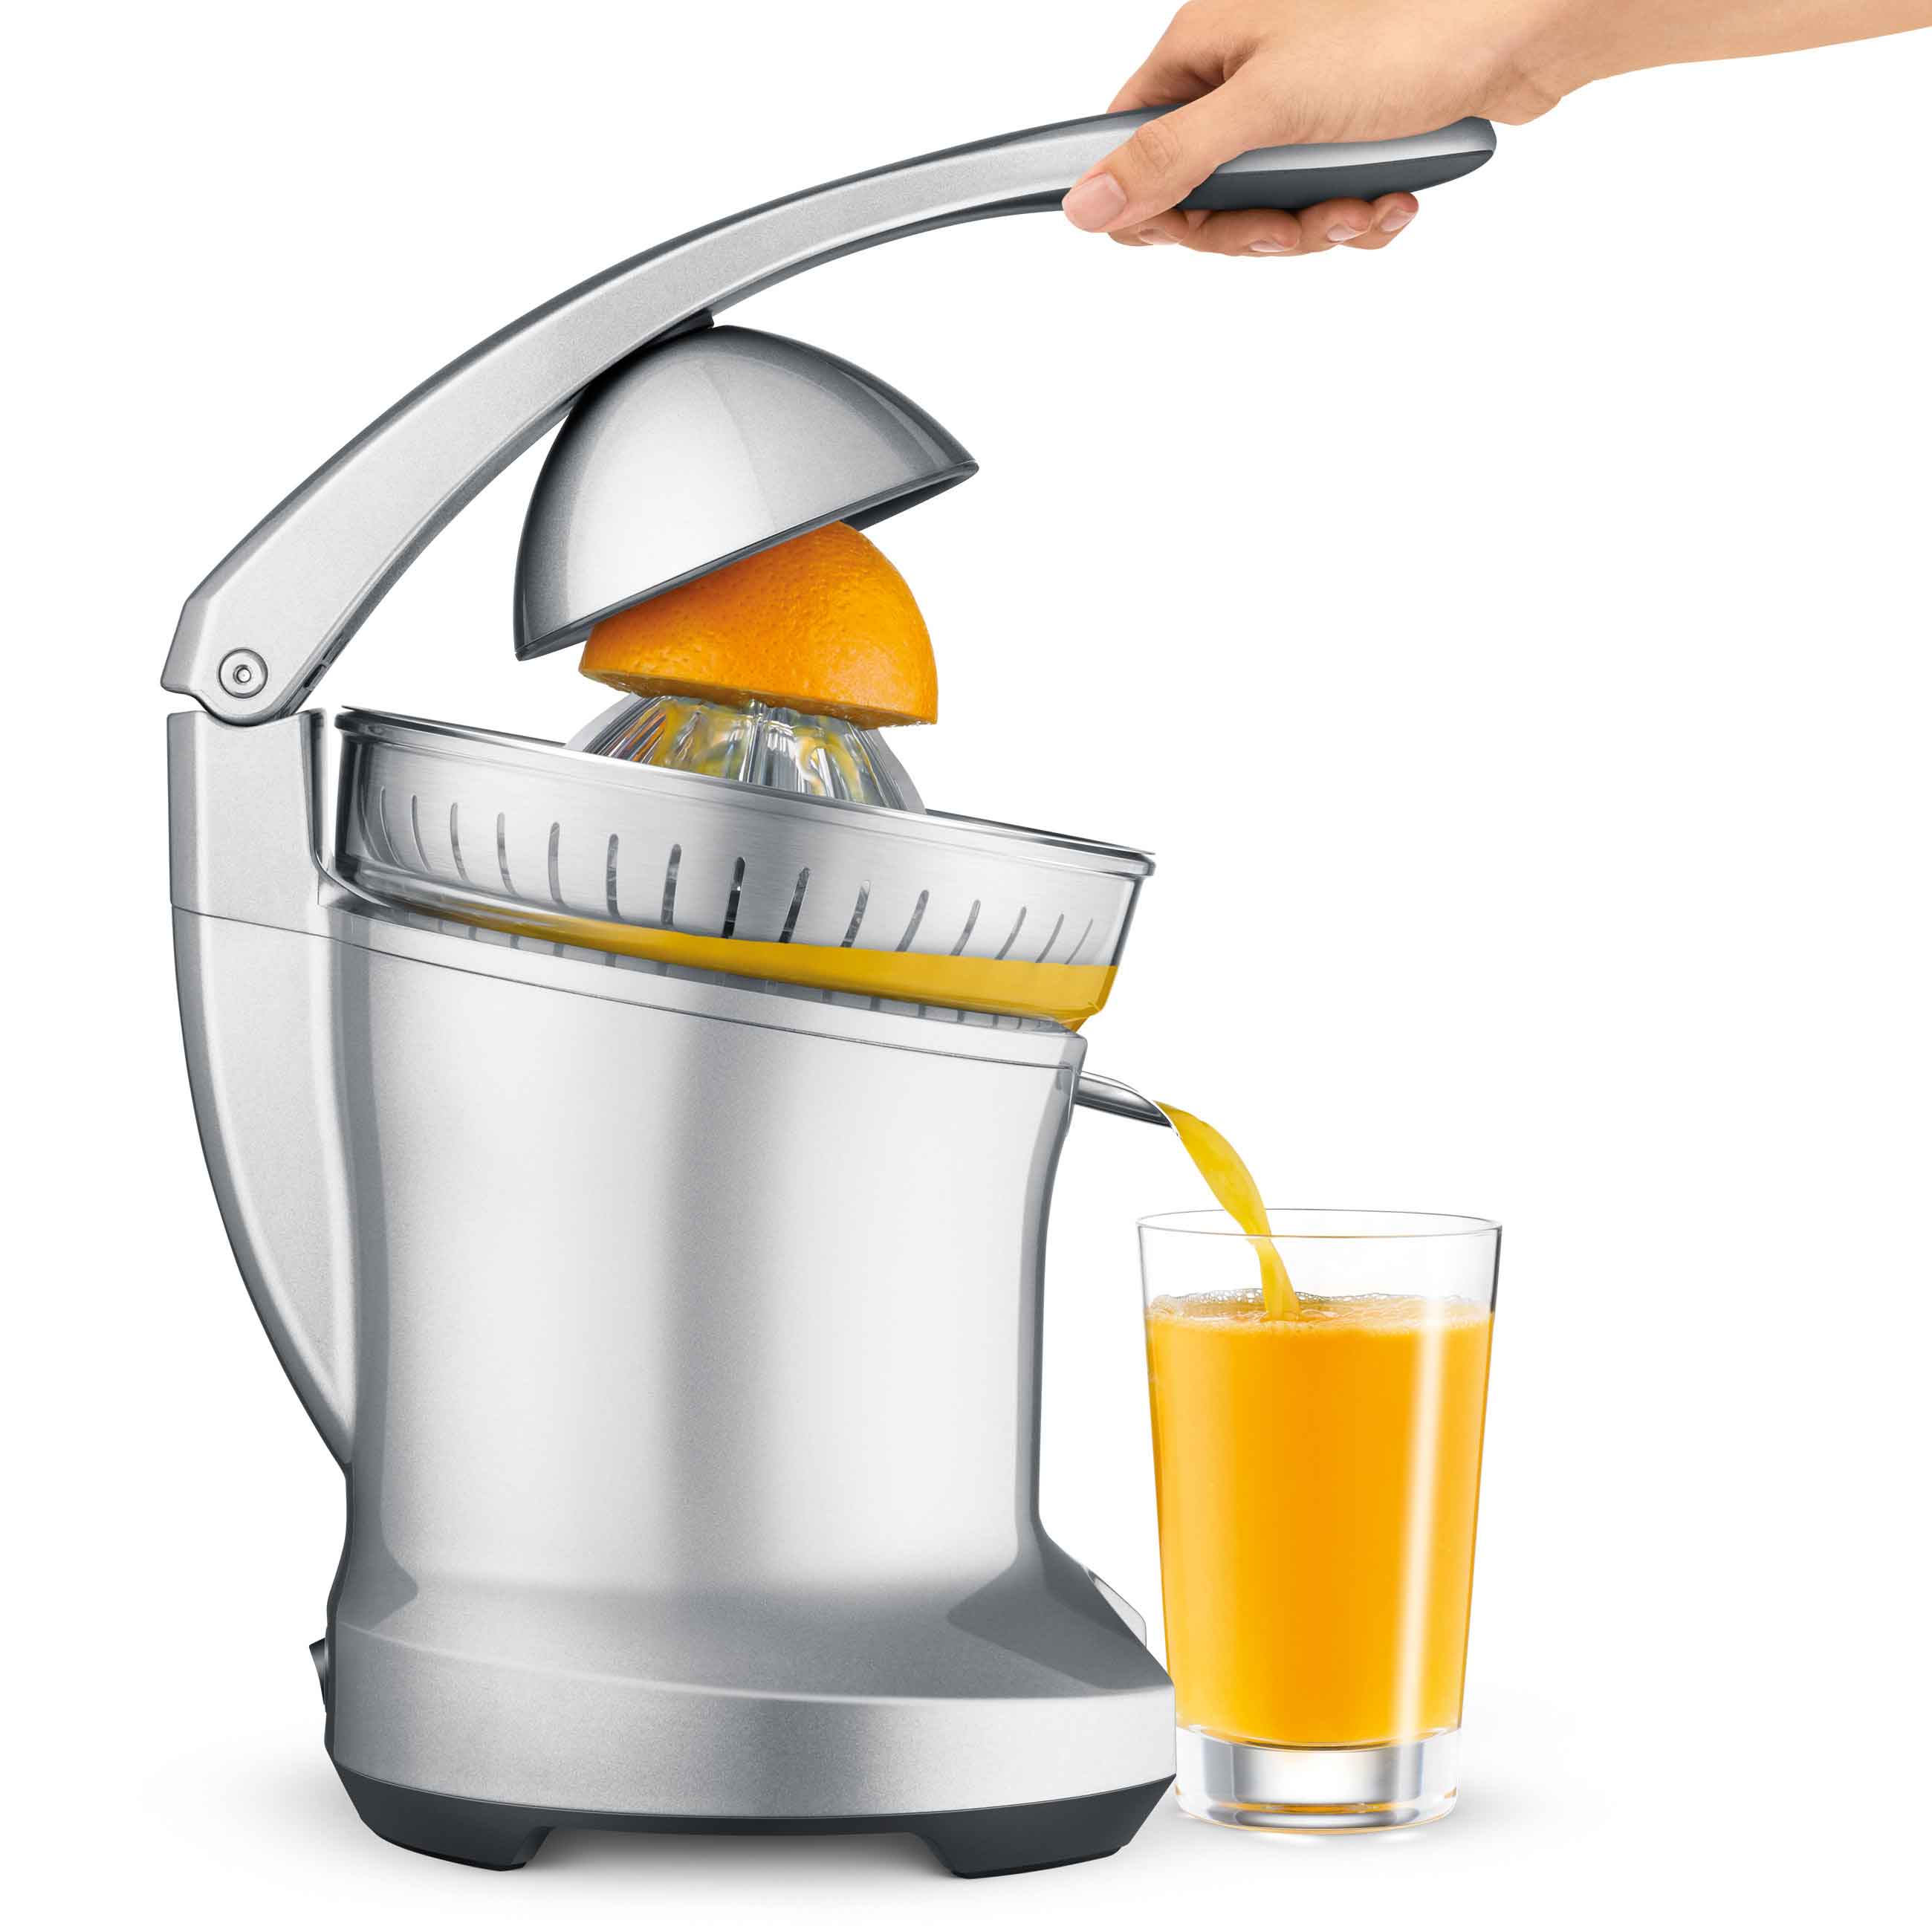  Cantilever handle making squeezing juice easy.